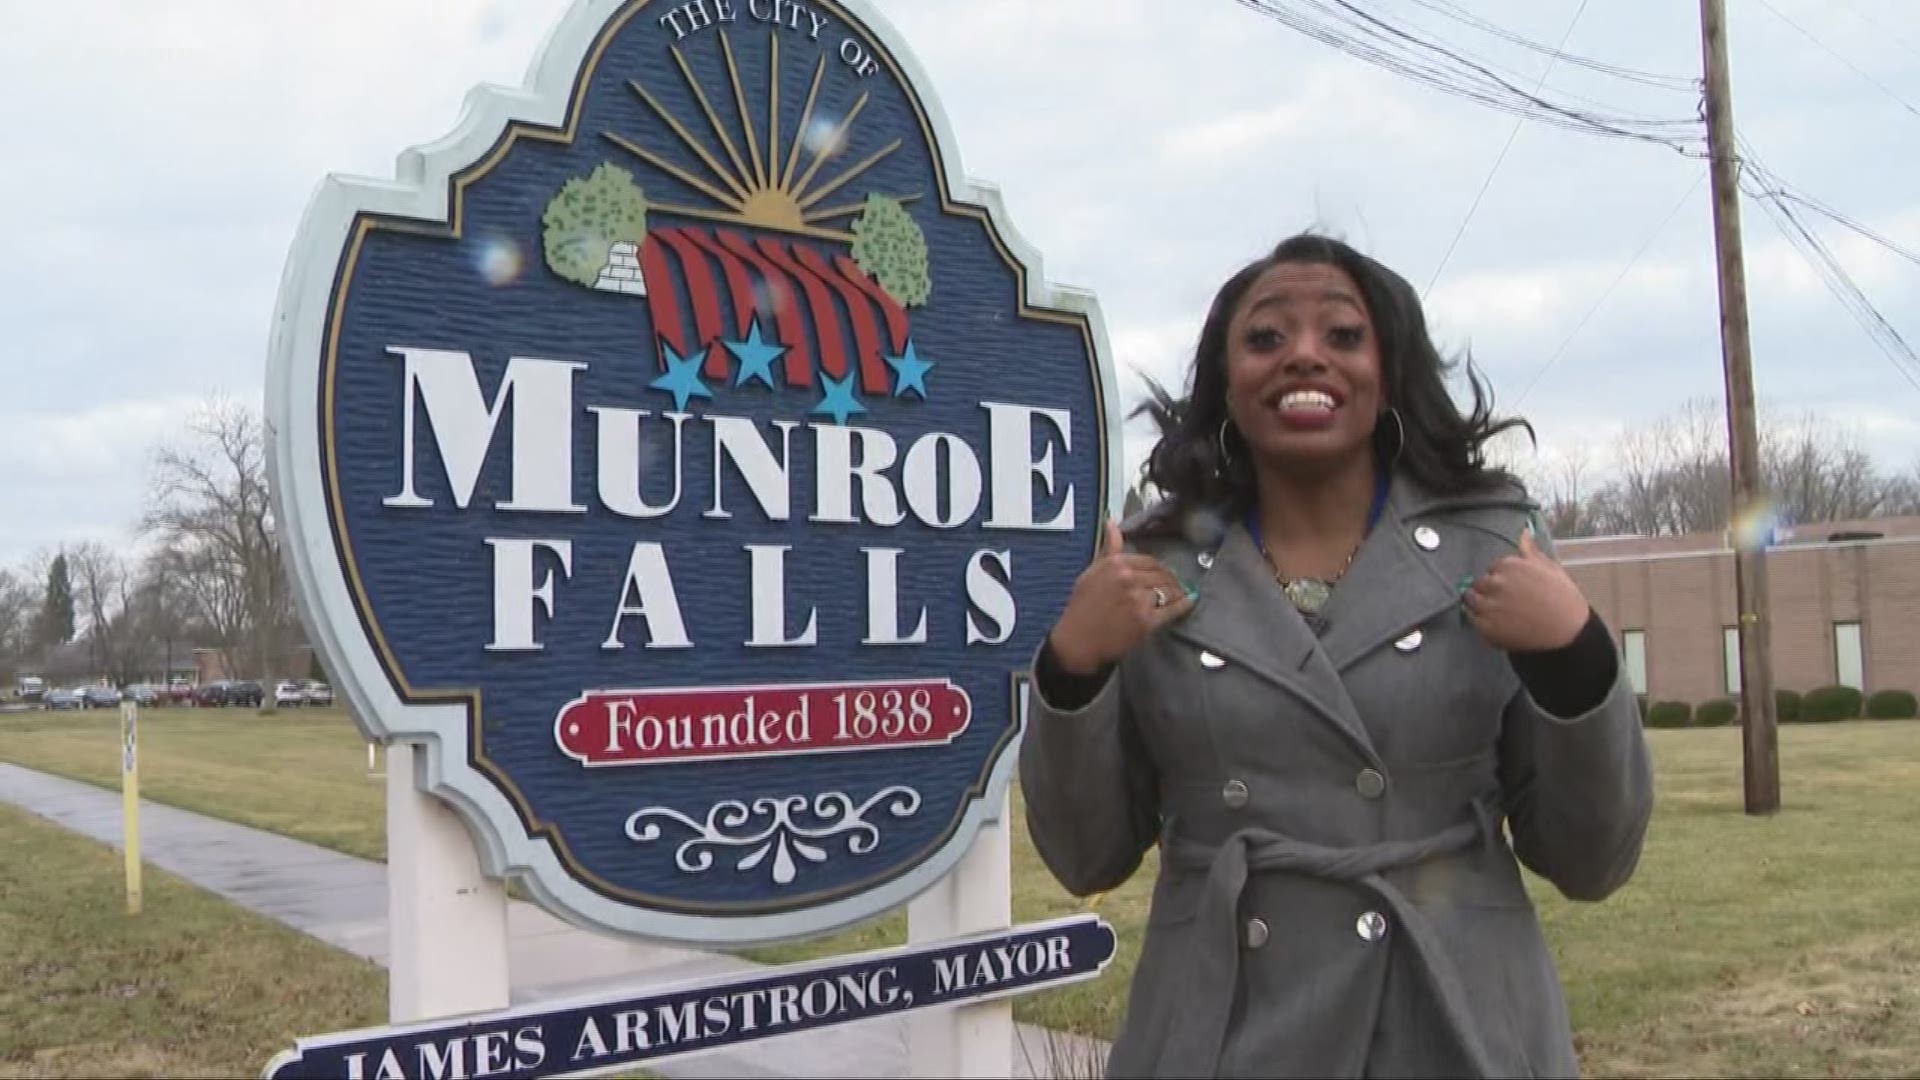 March 21, 2019: We explore the coolest things about Munroe Falls and the 44262 zip code.